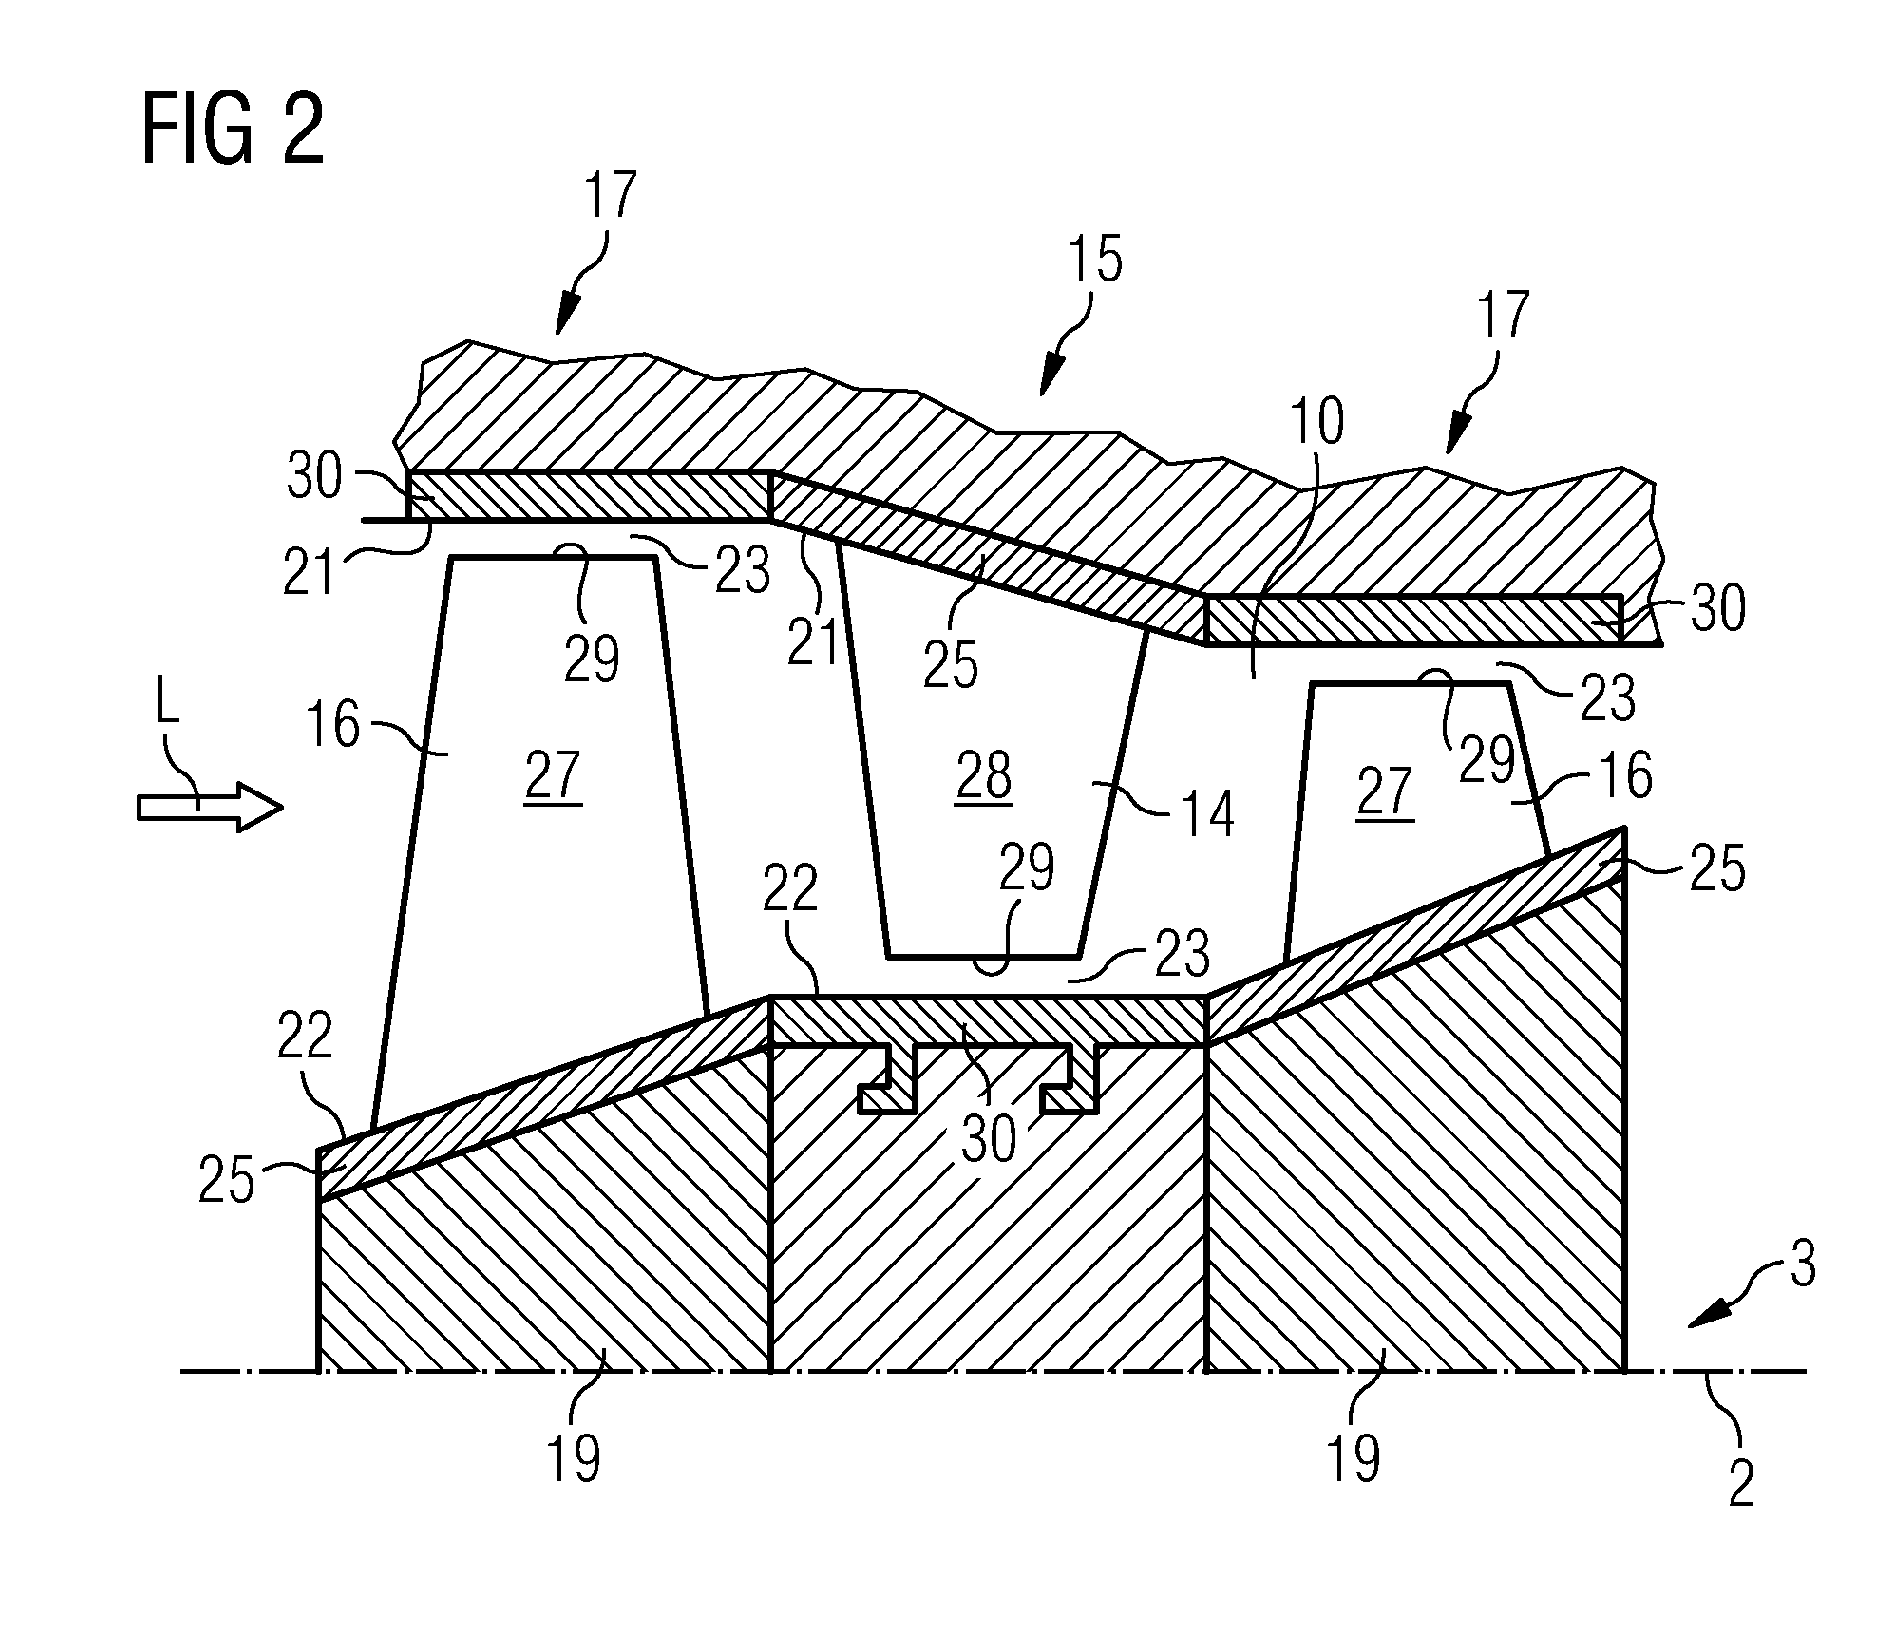 Airfoil and corresponding guide vane, blade, gas turbine and turbomachine